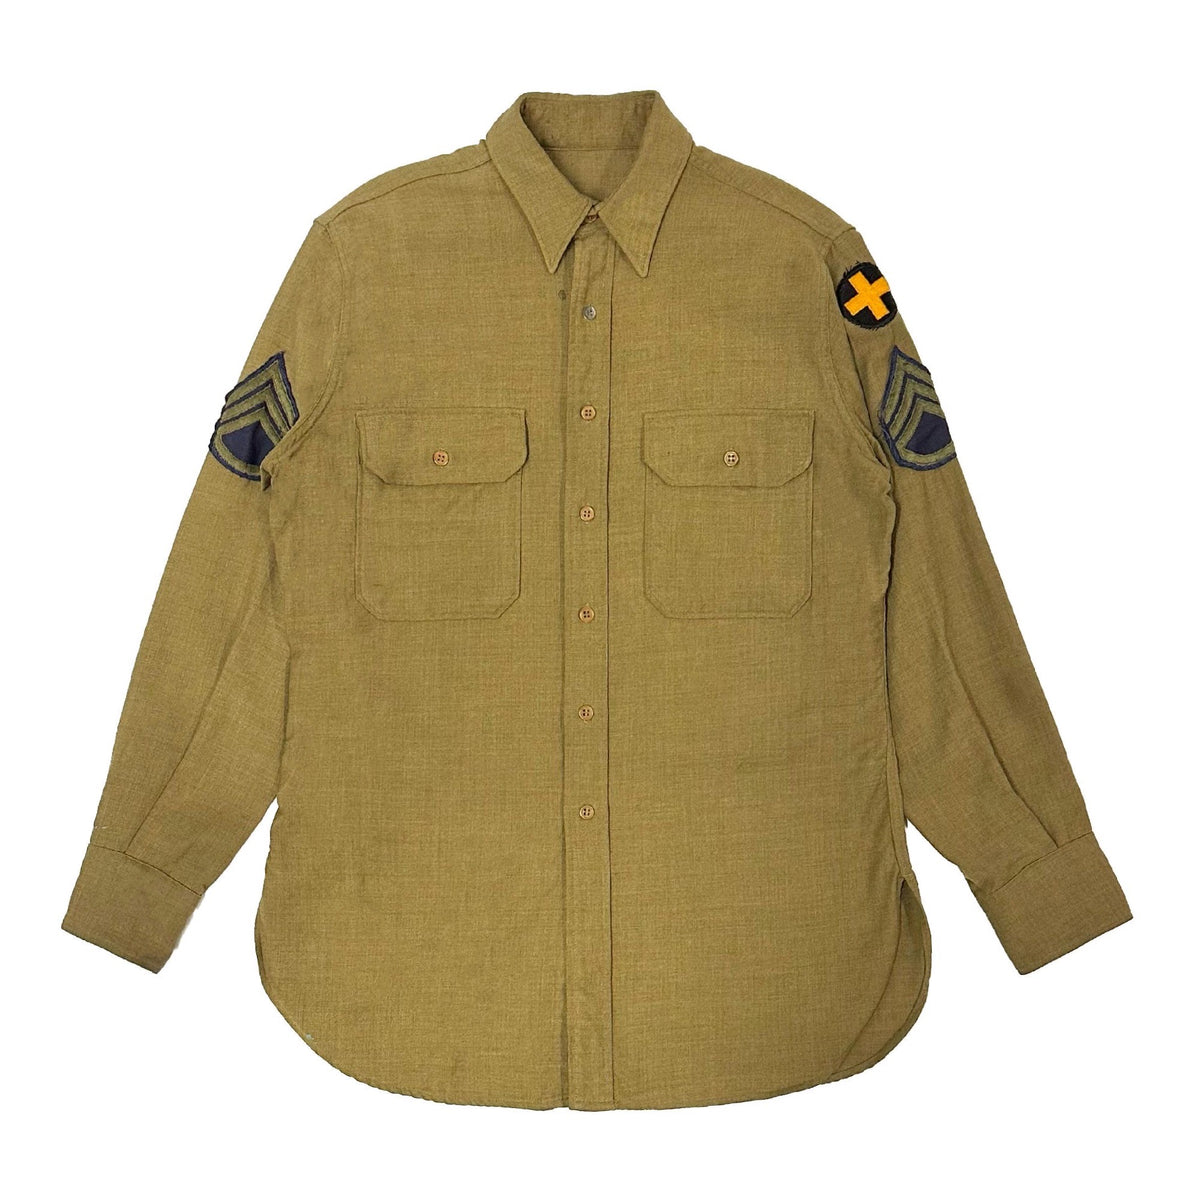 Browse 1940'S US ARMY 33RD INFANTRY AIRBORNE M37 L/S B.D. SHIRT